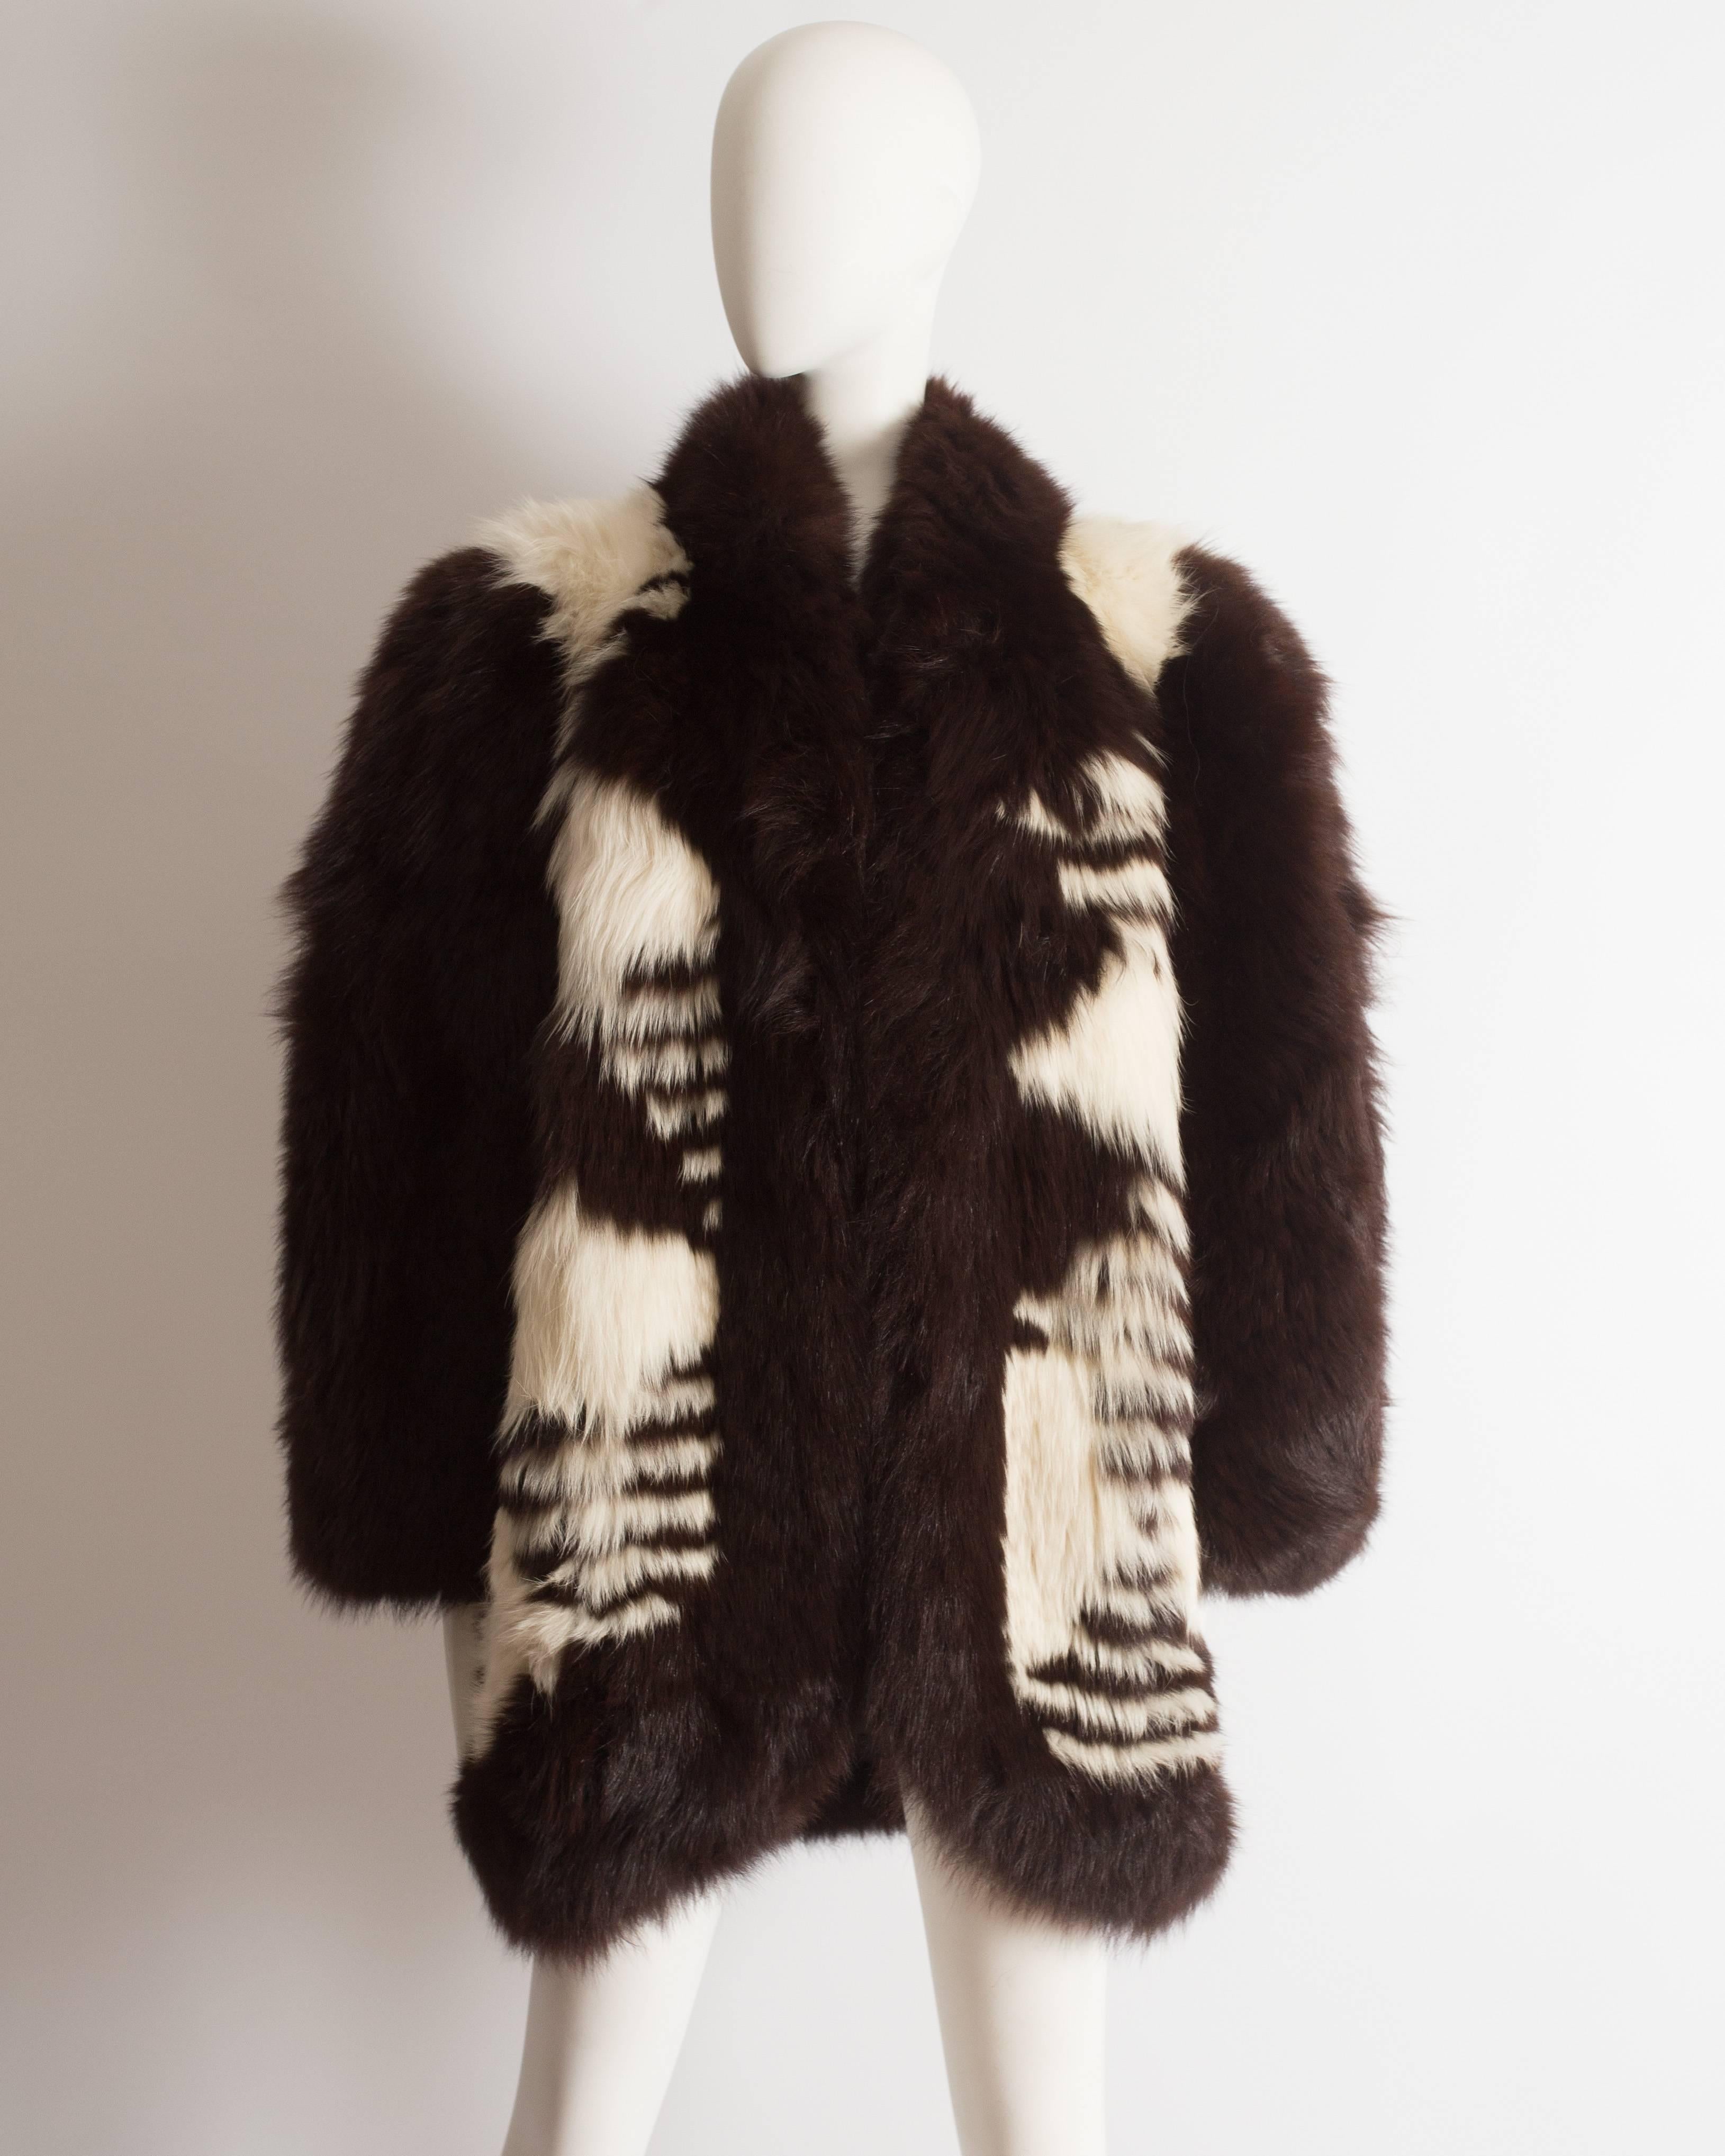 Presenting an exquisite Yves Saint Laurent oversized wild fox coat, a rare and luxurious piece from the 1980s. This coat exemplifies the brand's commitment to luxury and high fashion.

With its exaggerated shoulders, the coat exudes a sense of drama